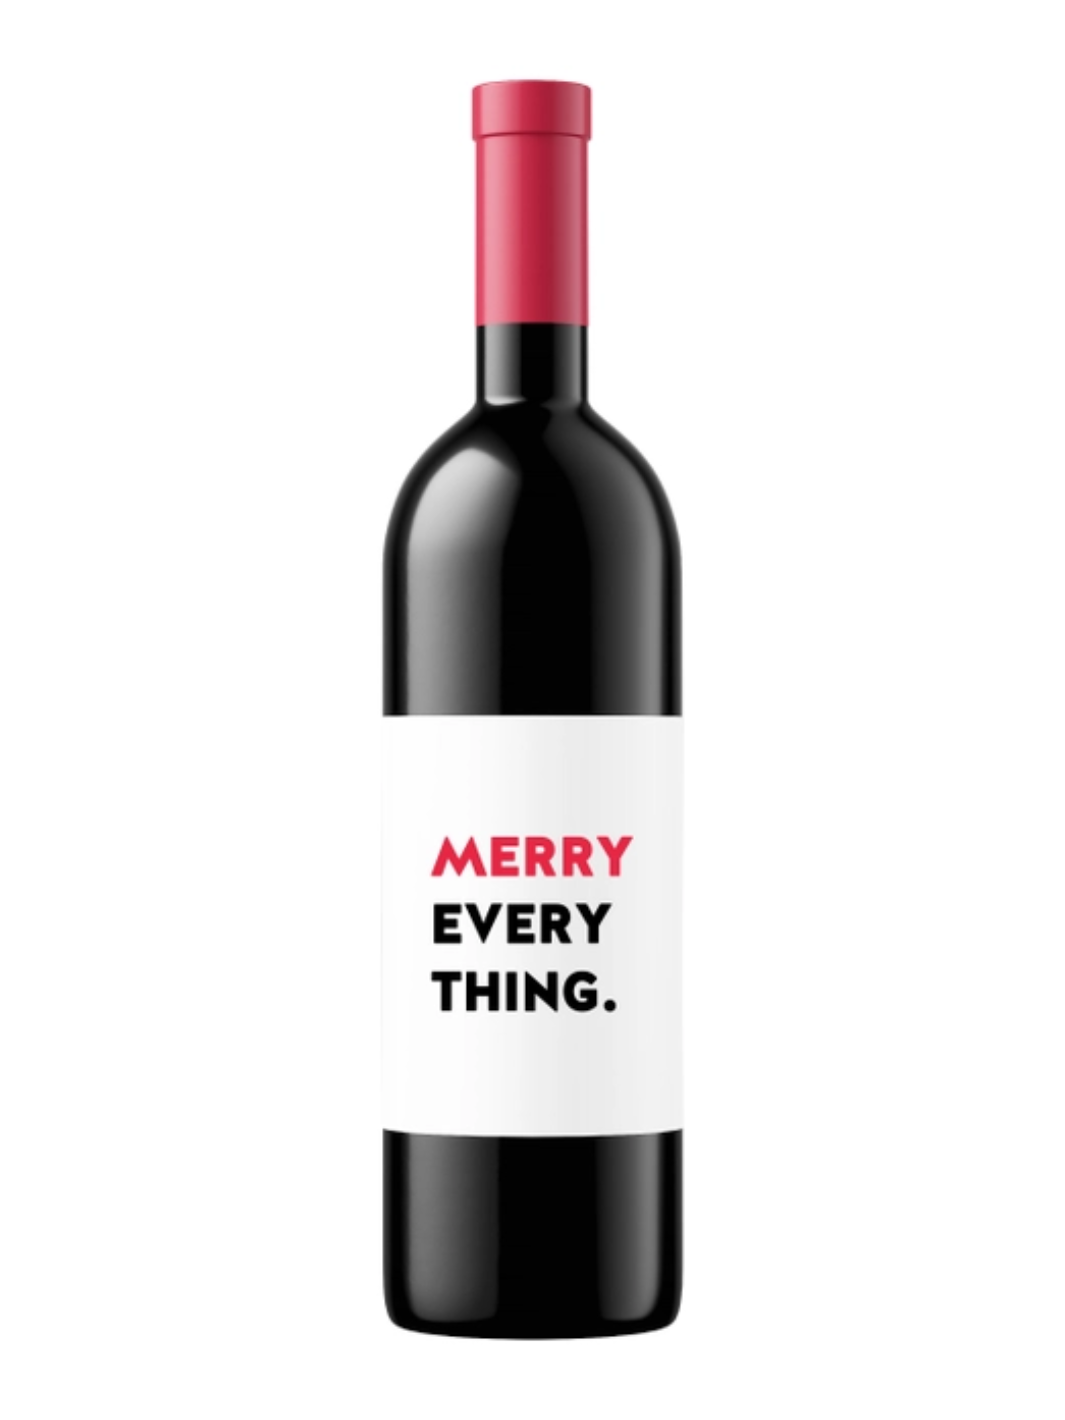 Merry Everything Wine Label